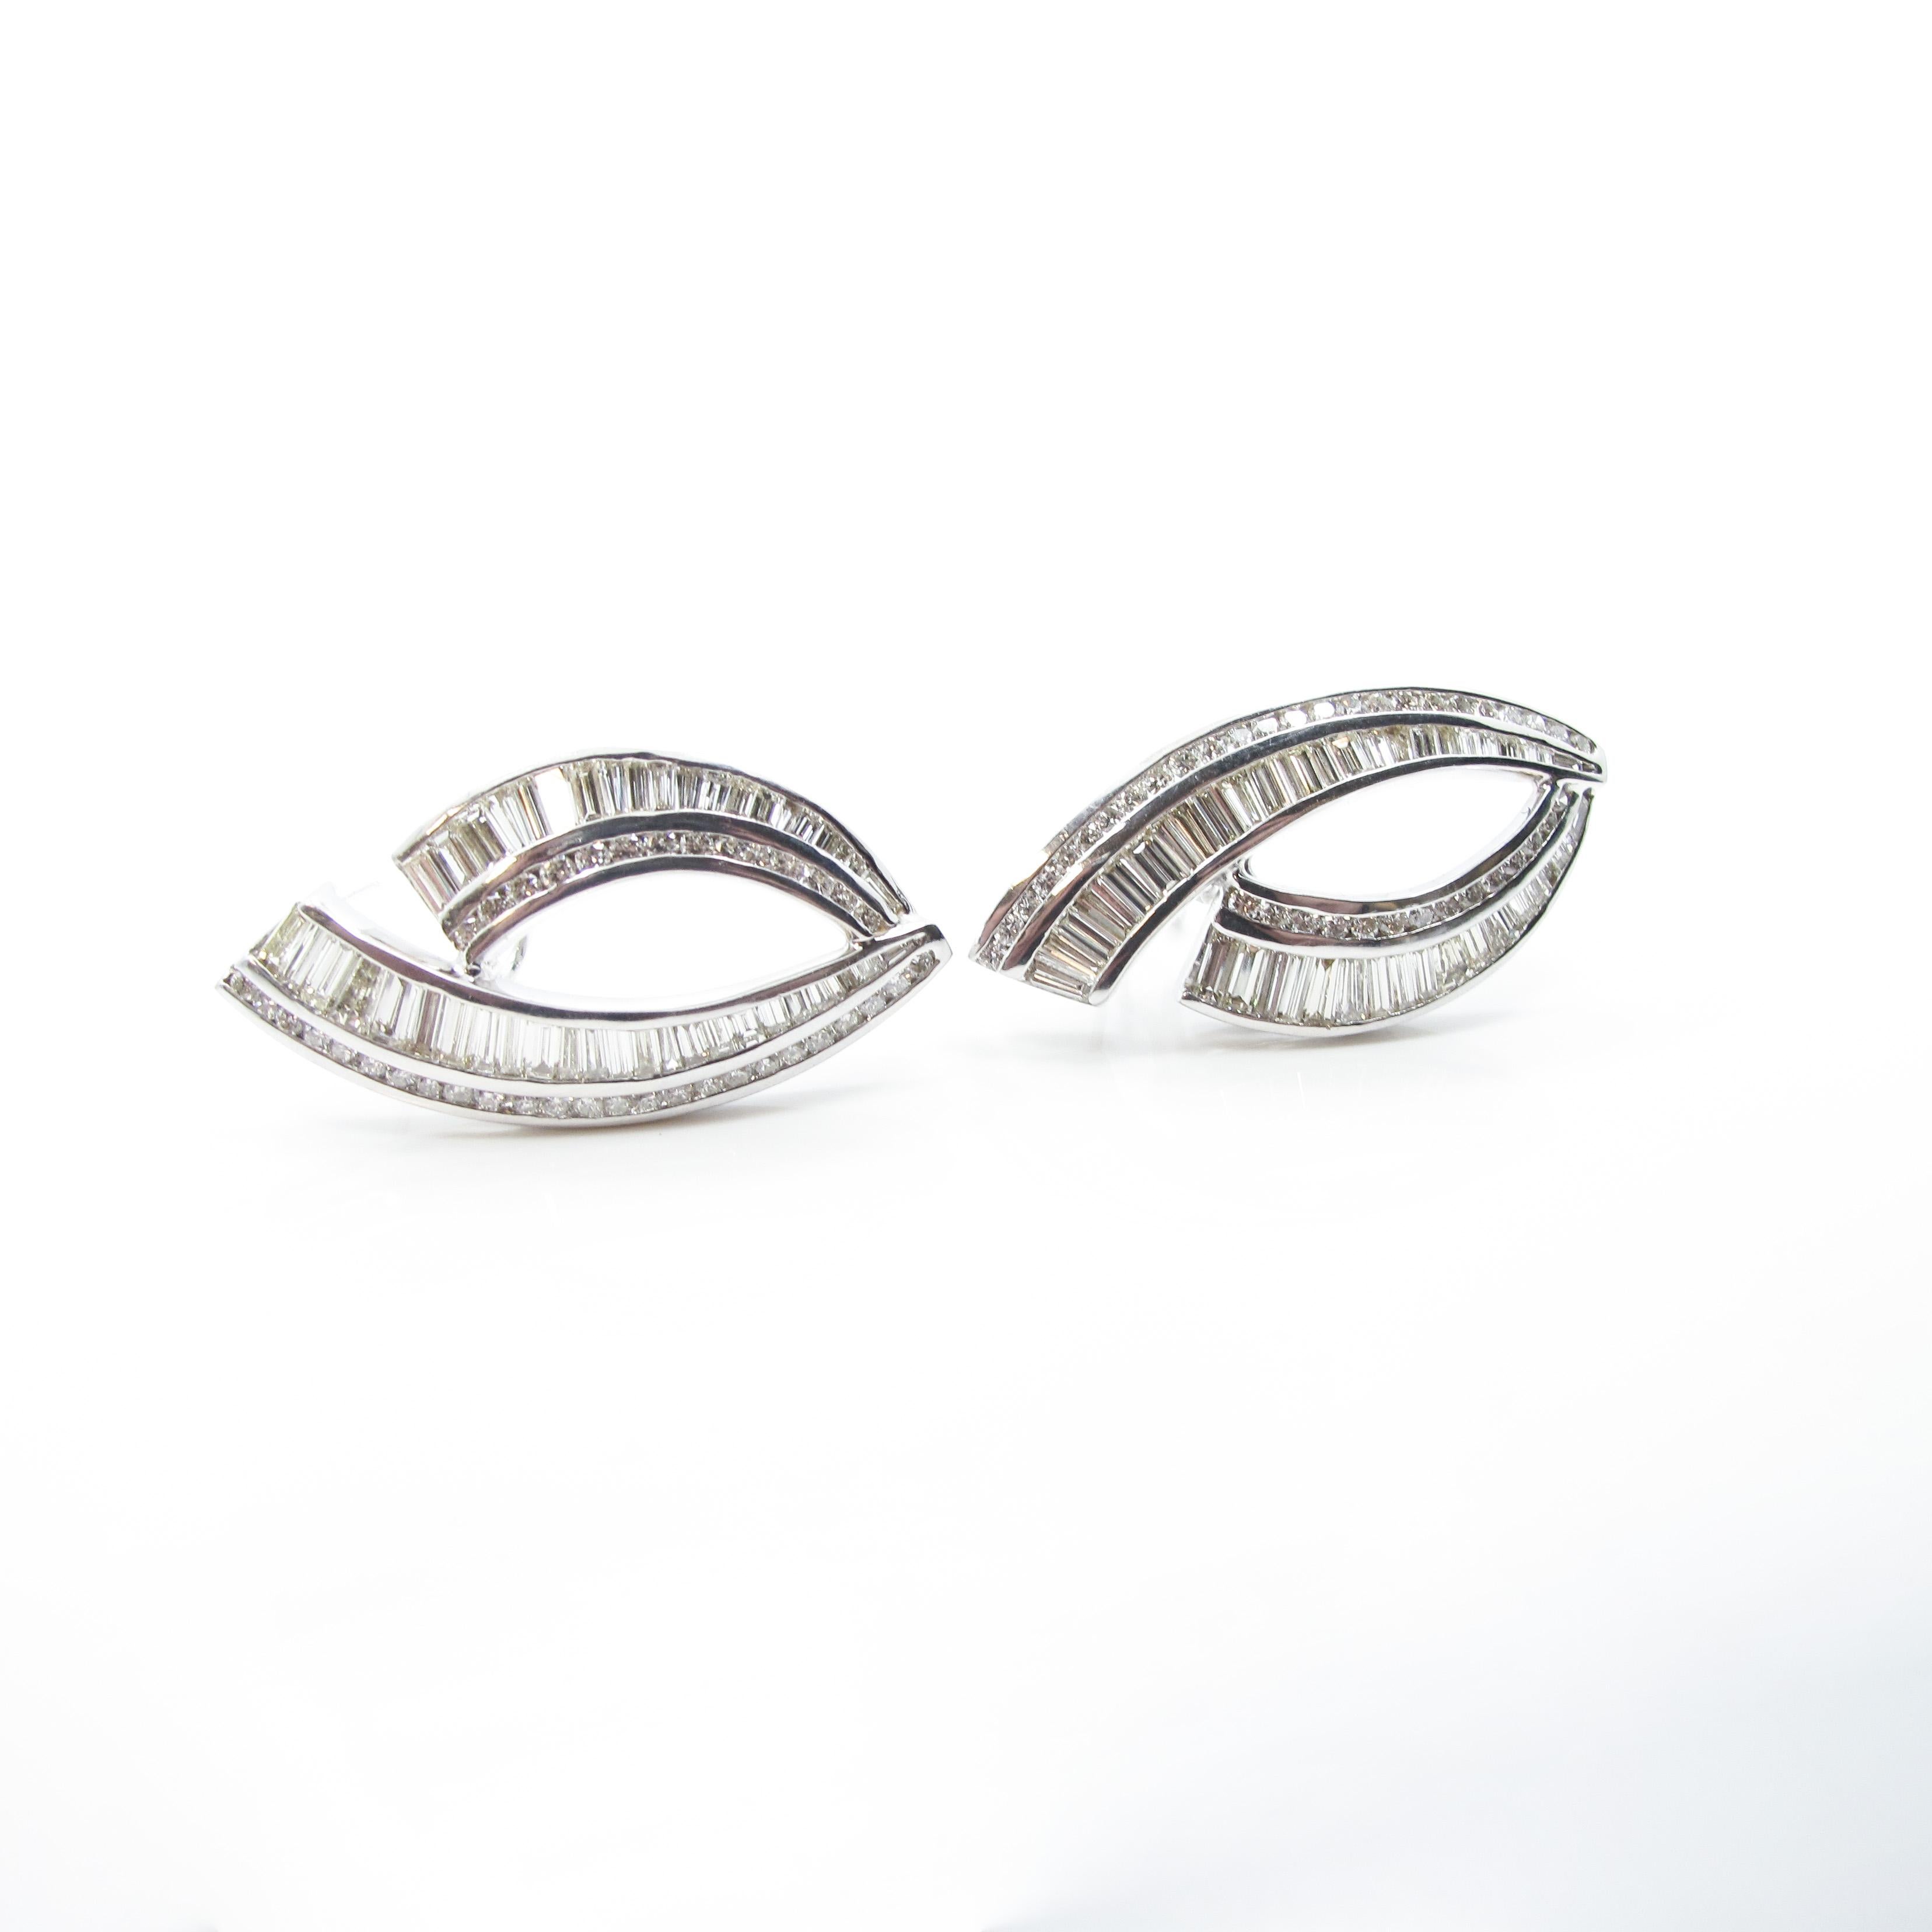 Estate baguette and round brilliant diamond earrings set in 18k white gold. The earrings feature 88 straight and tapered baguette diamonds weighing approximately 6.40ct total weight and 78 round brilliant diamonds weighing 1.56ct total weight, all